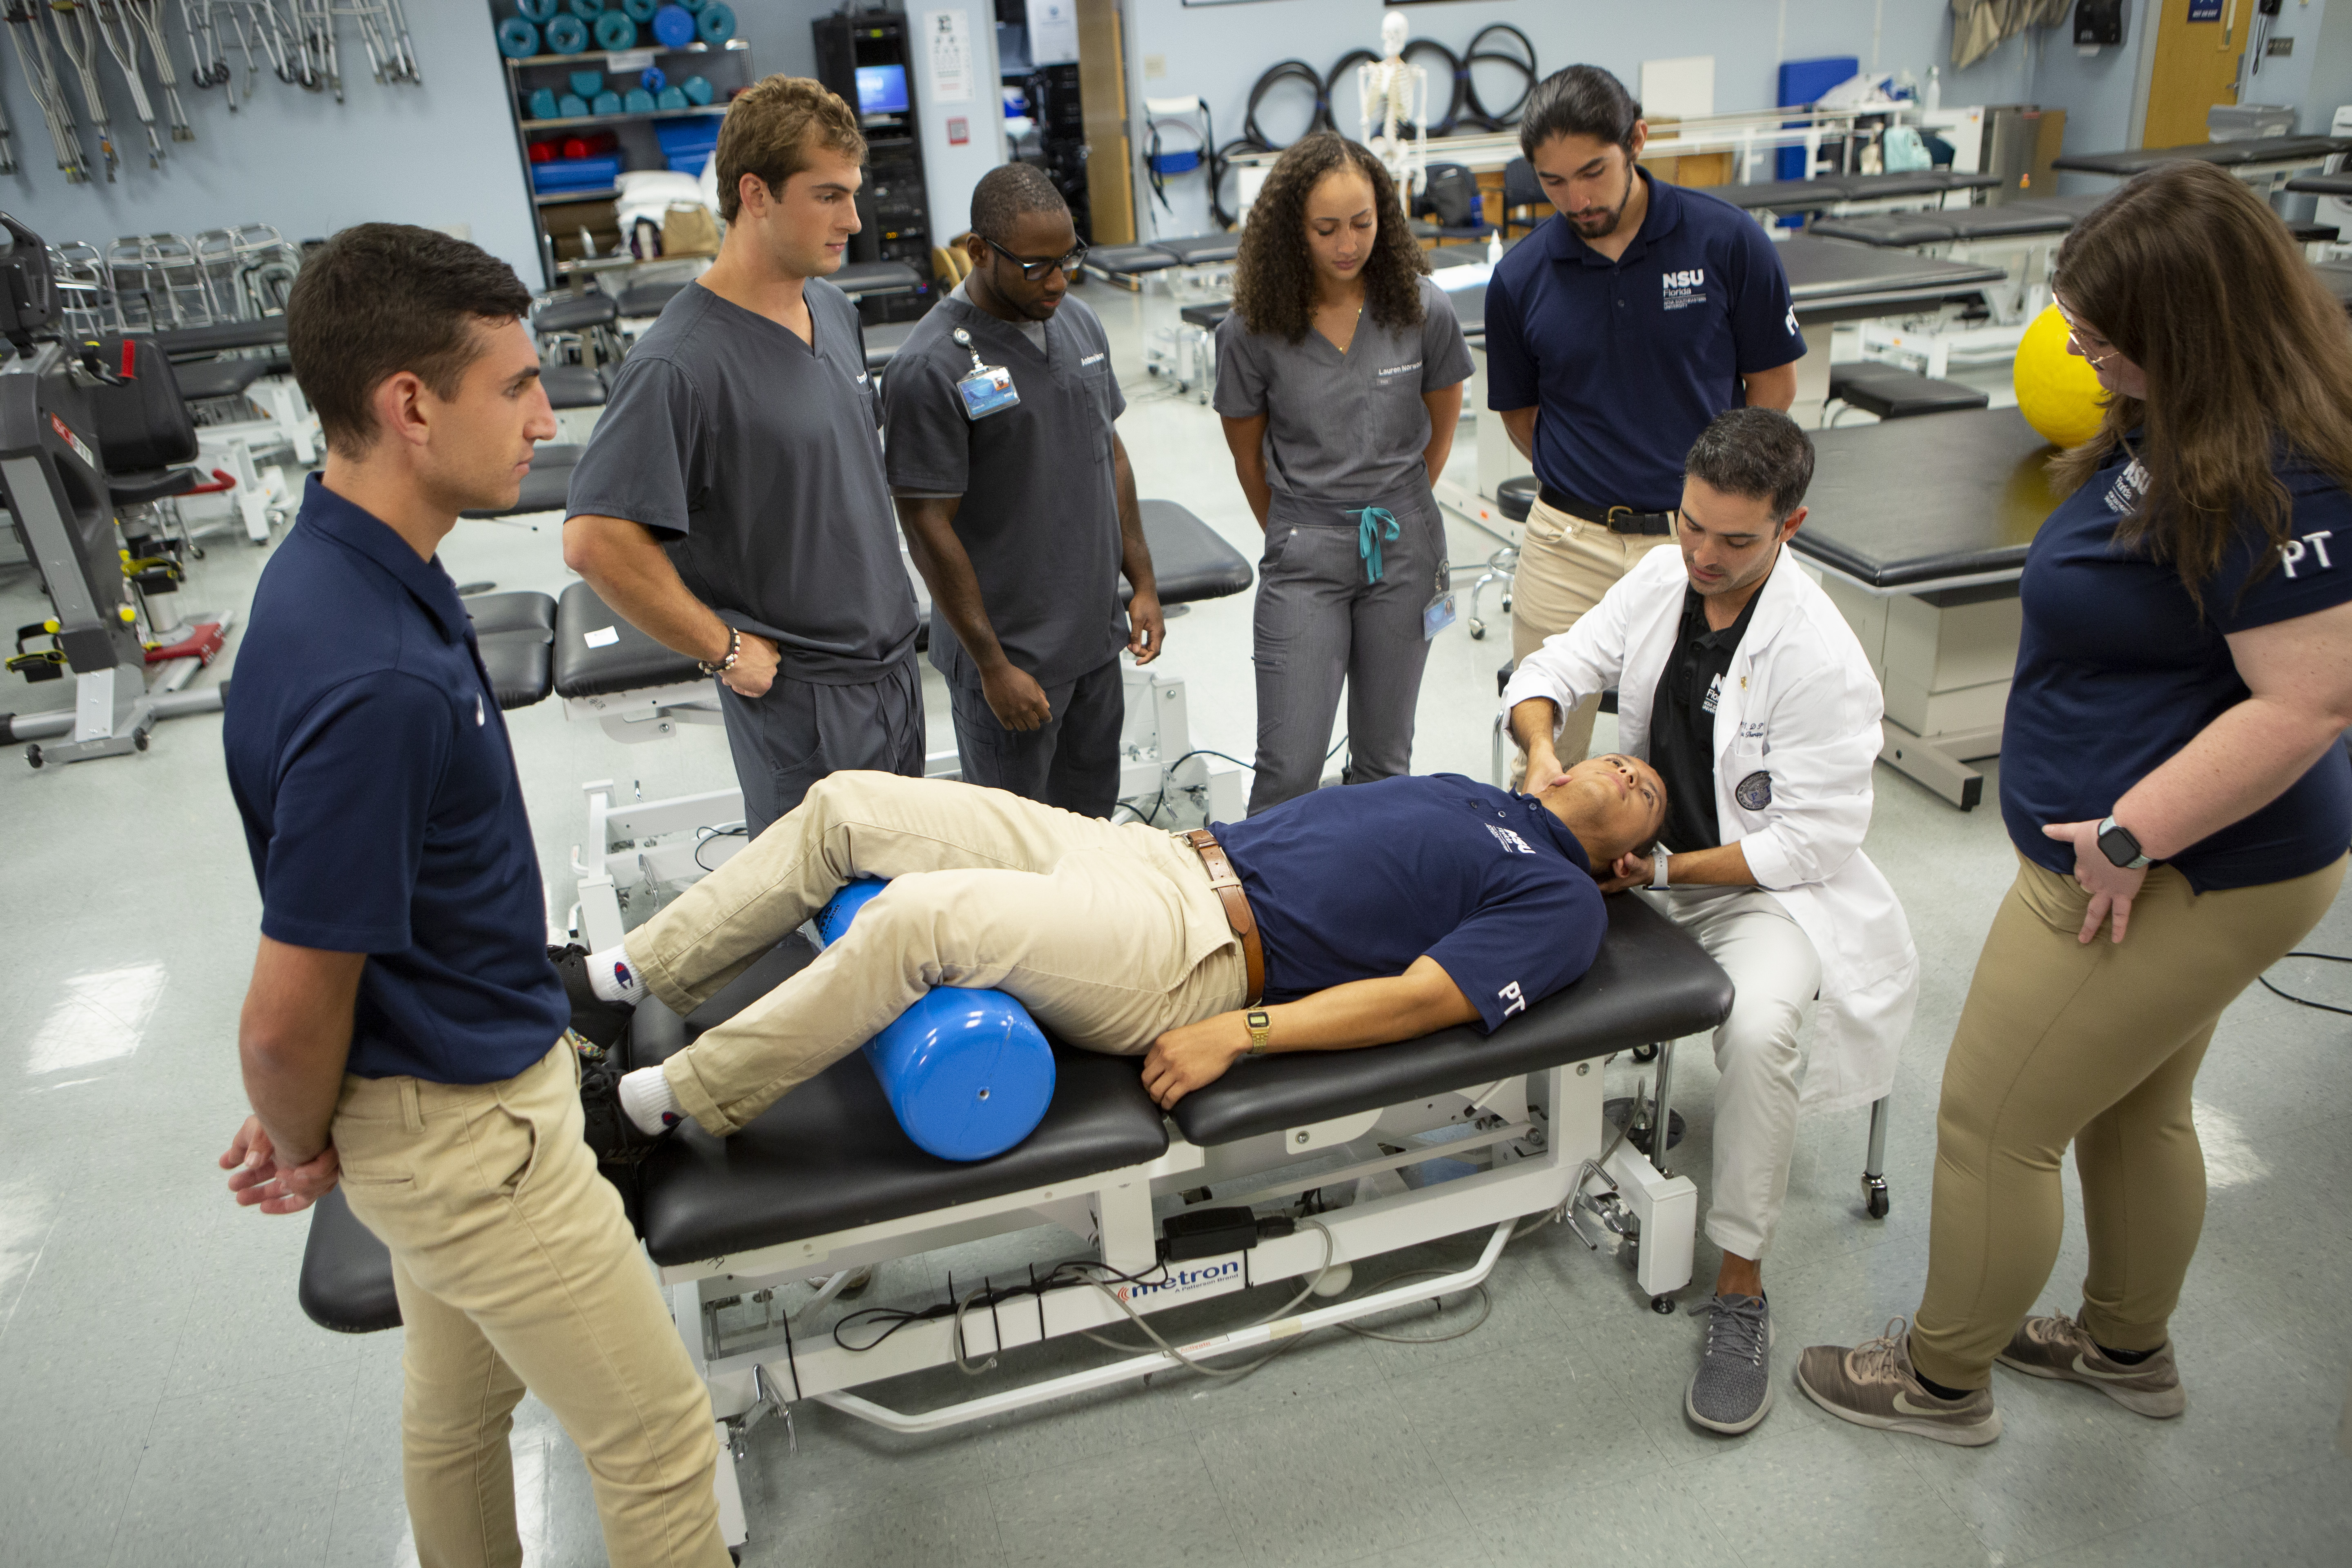 Doctor of Physical Therapy Program